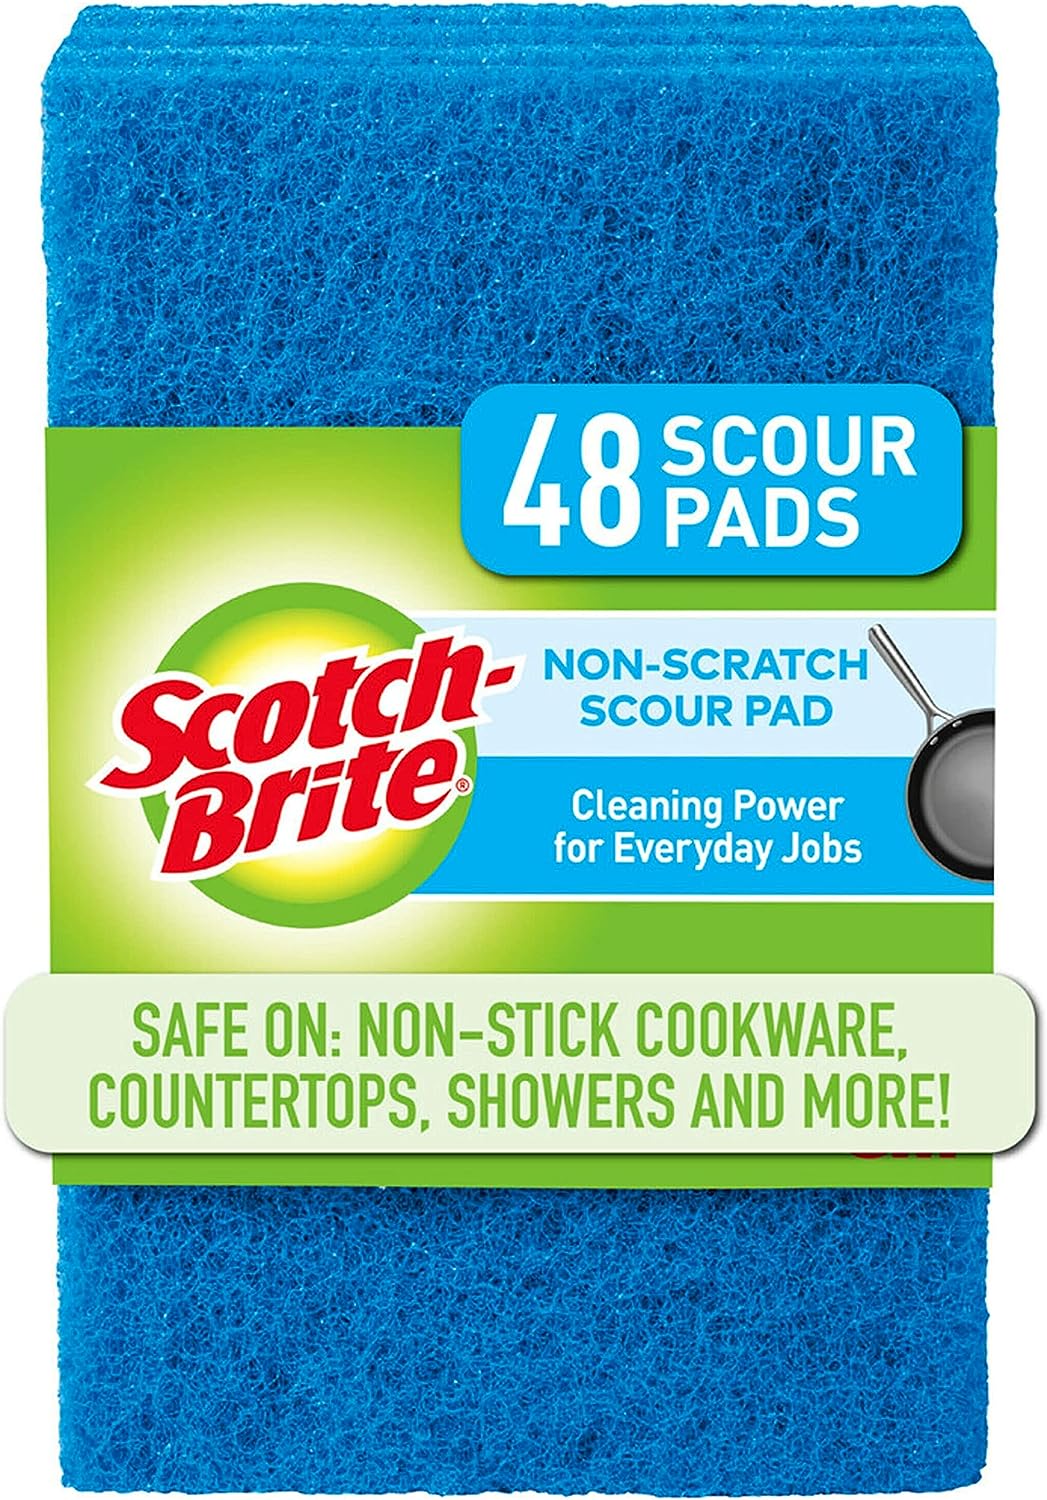 Scotch-Brite Non-Scratch Scour Pads, Scouring Pads for Kitchen and Dish Cleaning, 48 Pads